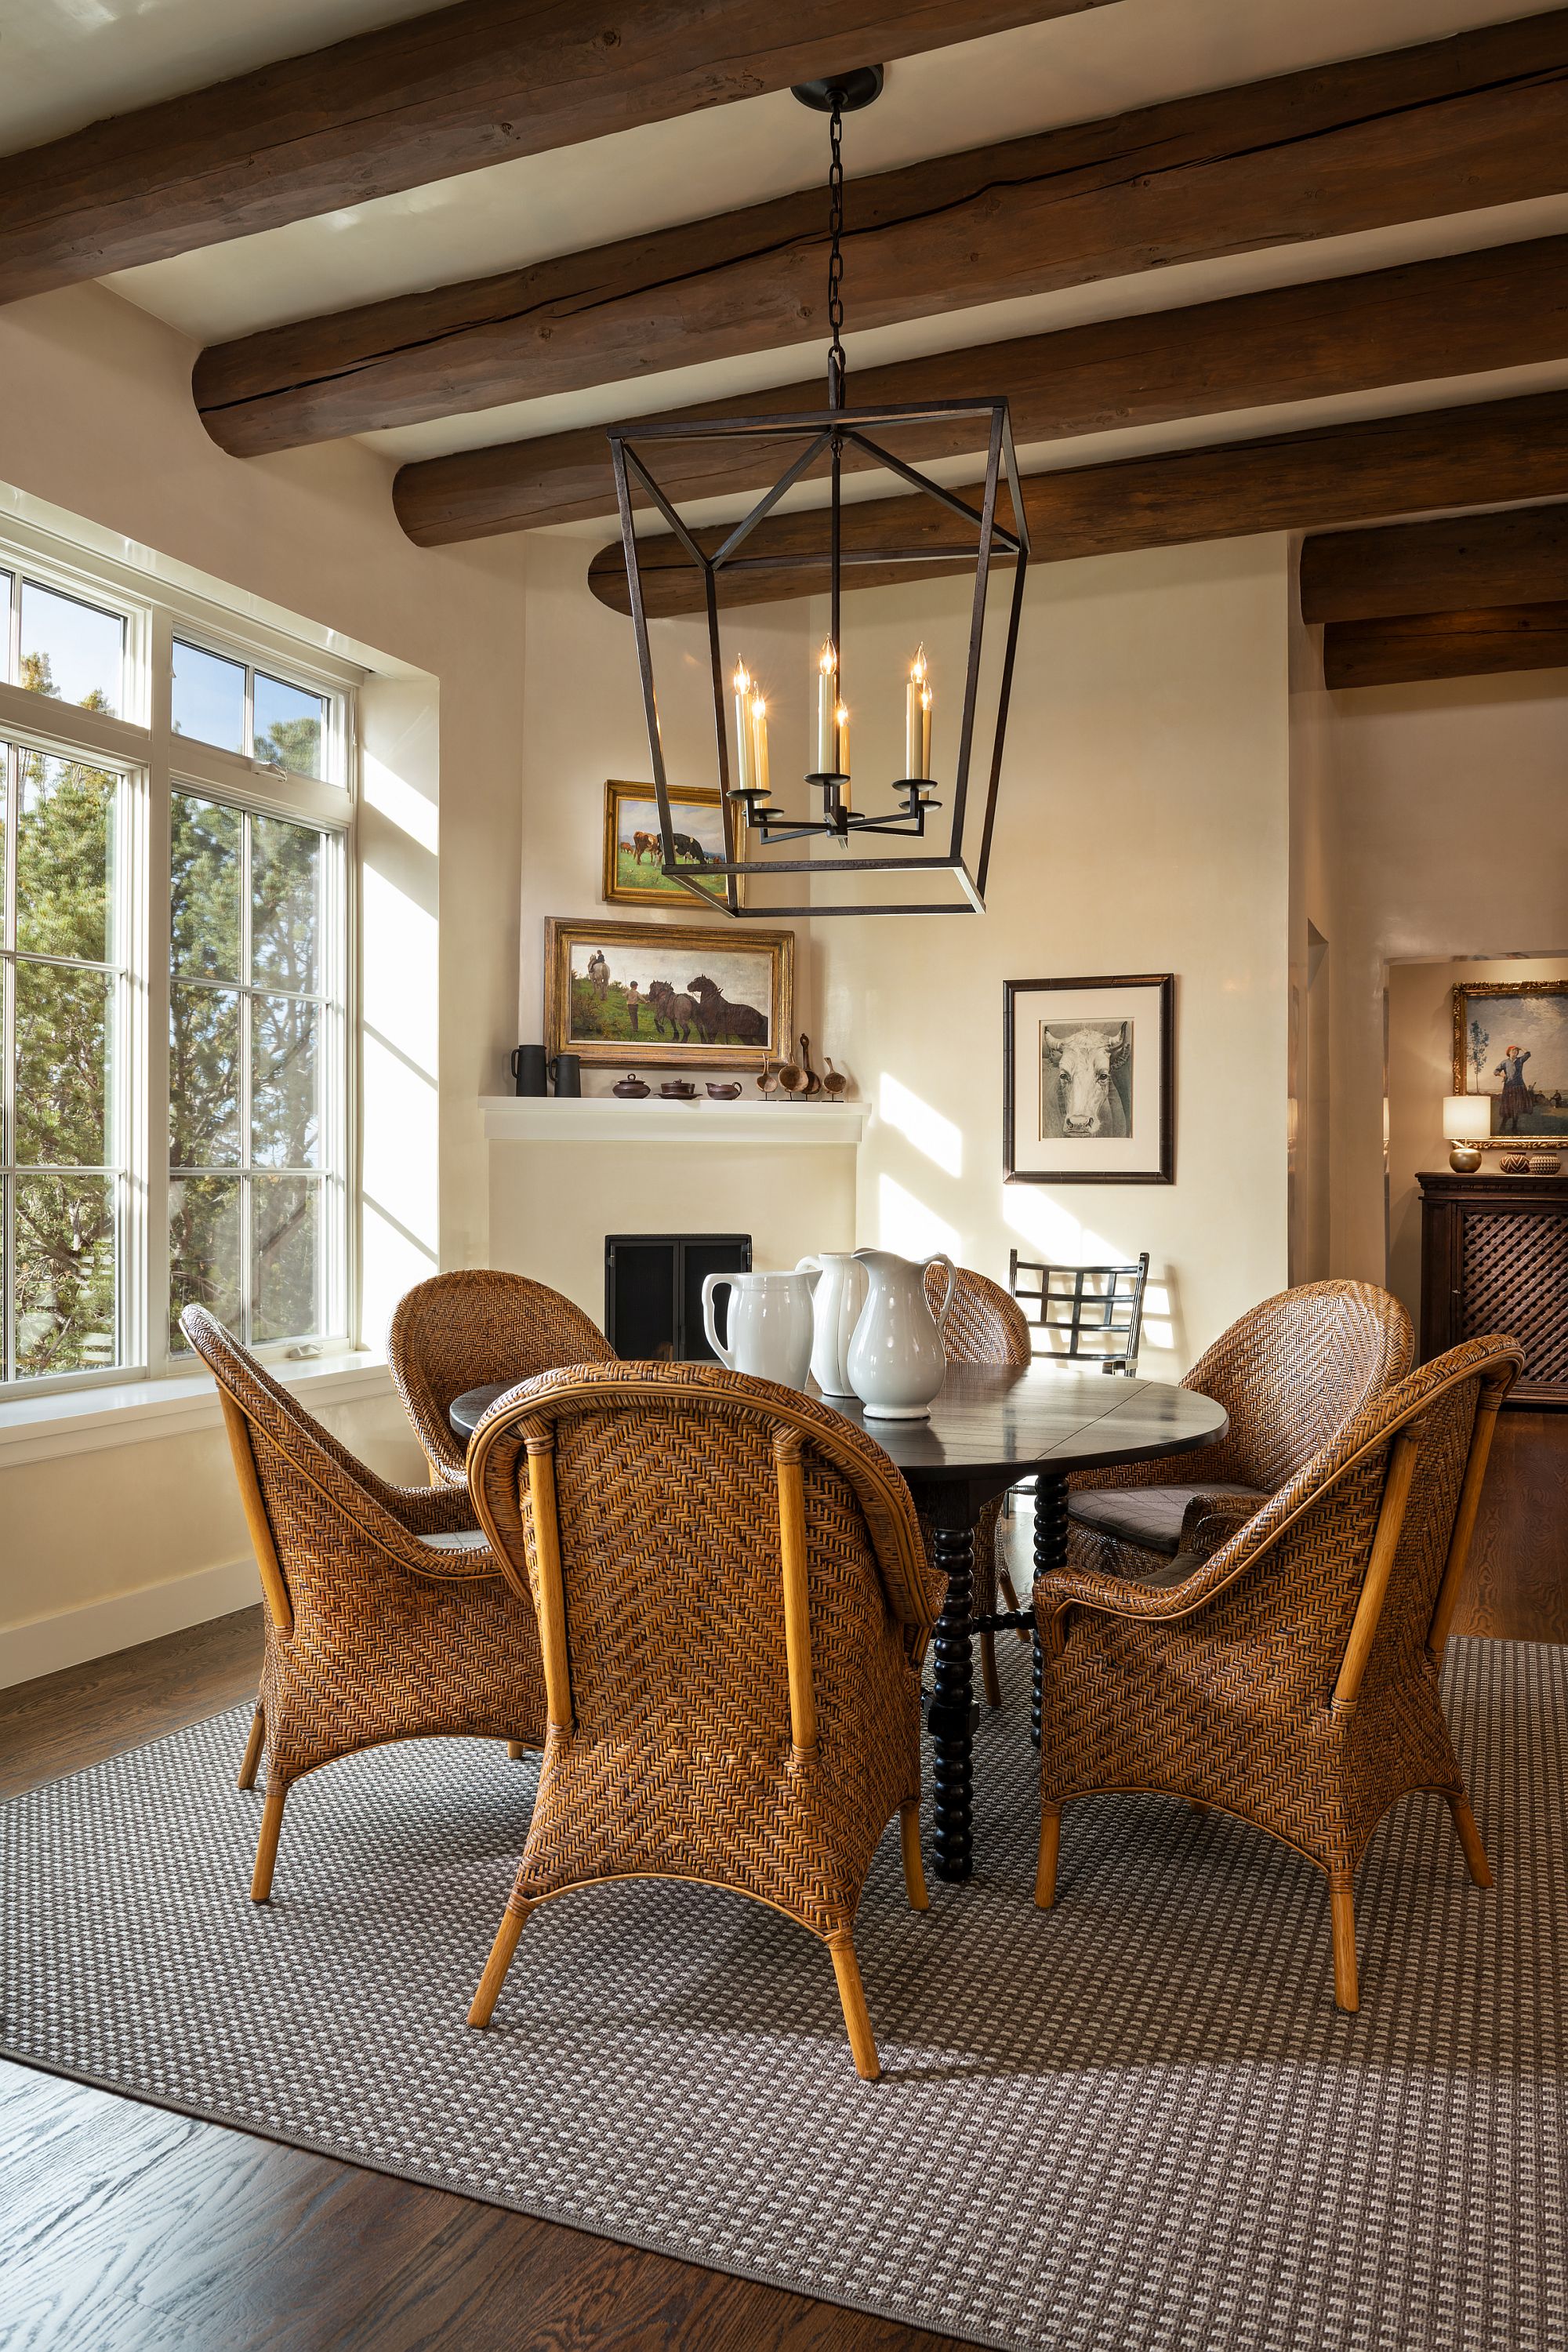 Natural-finishes-and-ceiling-wooden-beams-give-the-dining-room-a-classic-vibe